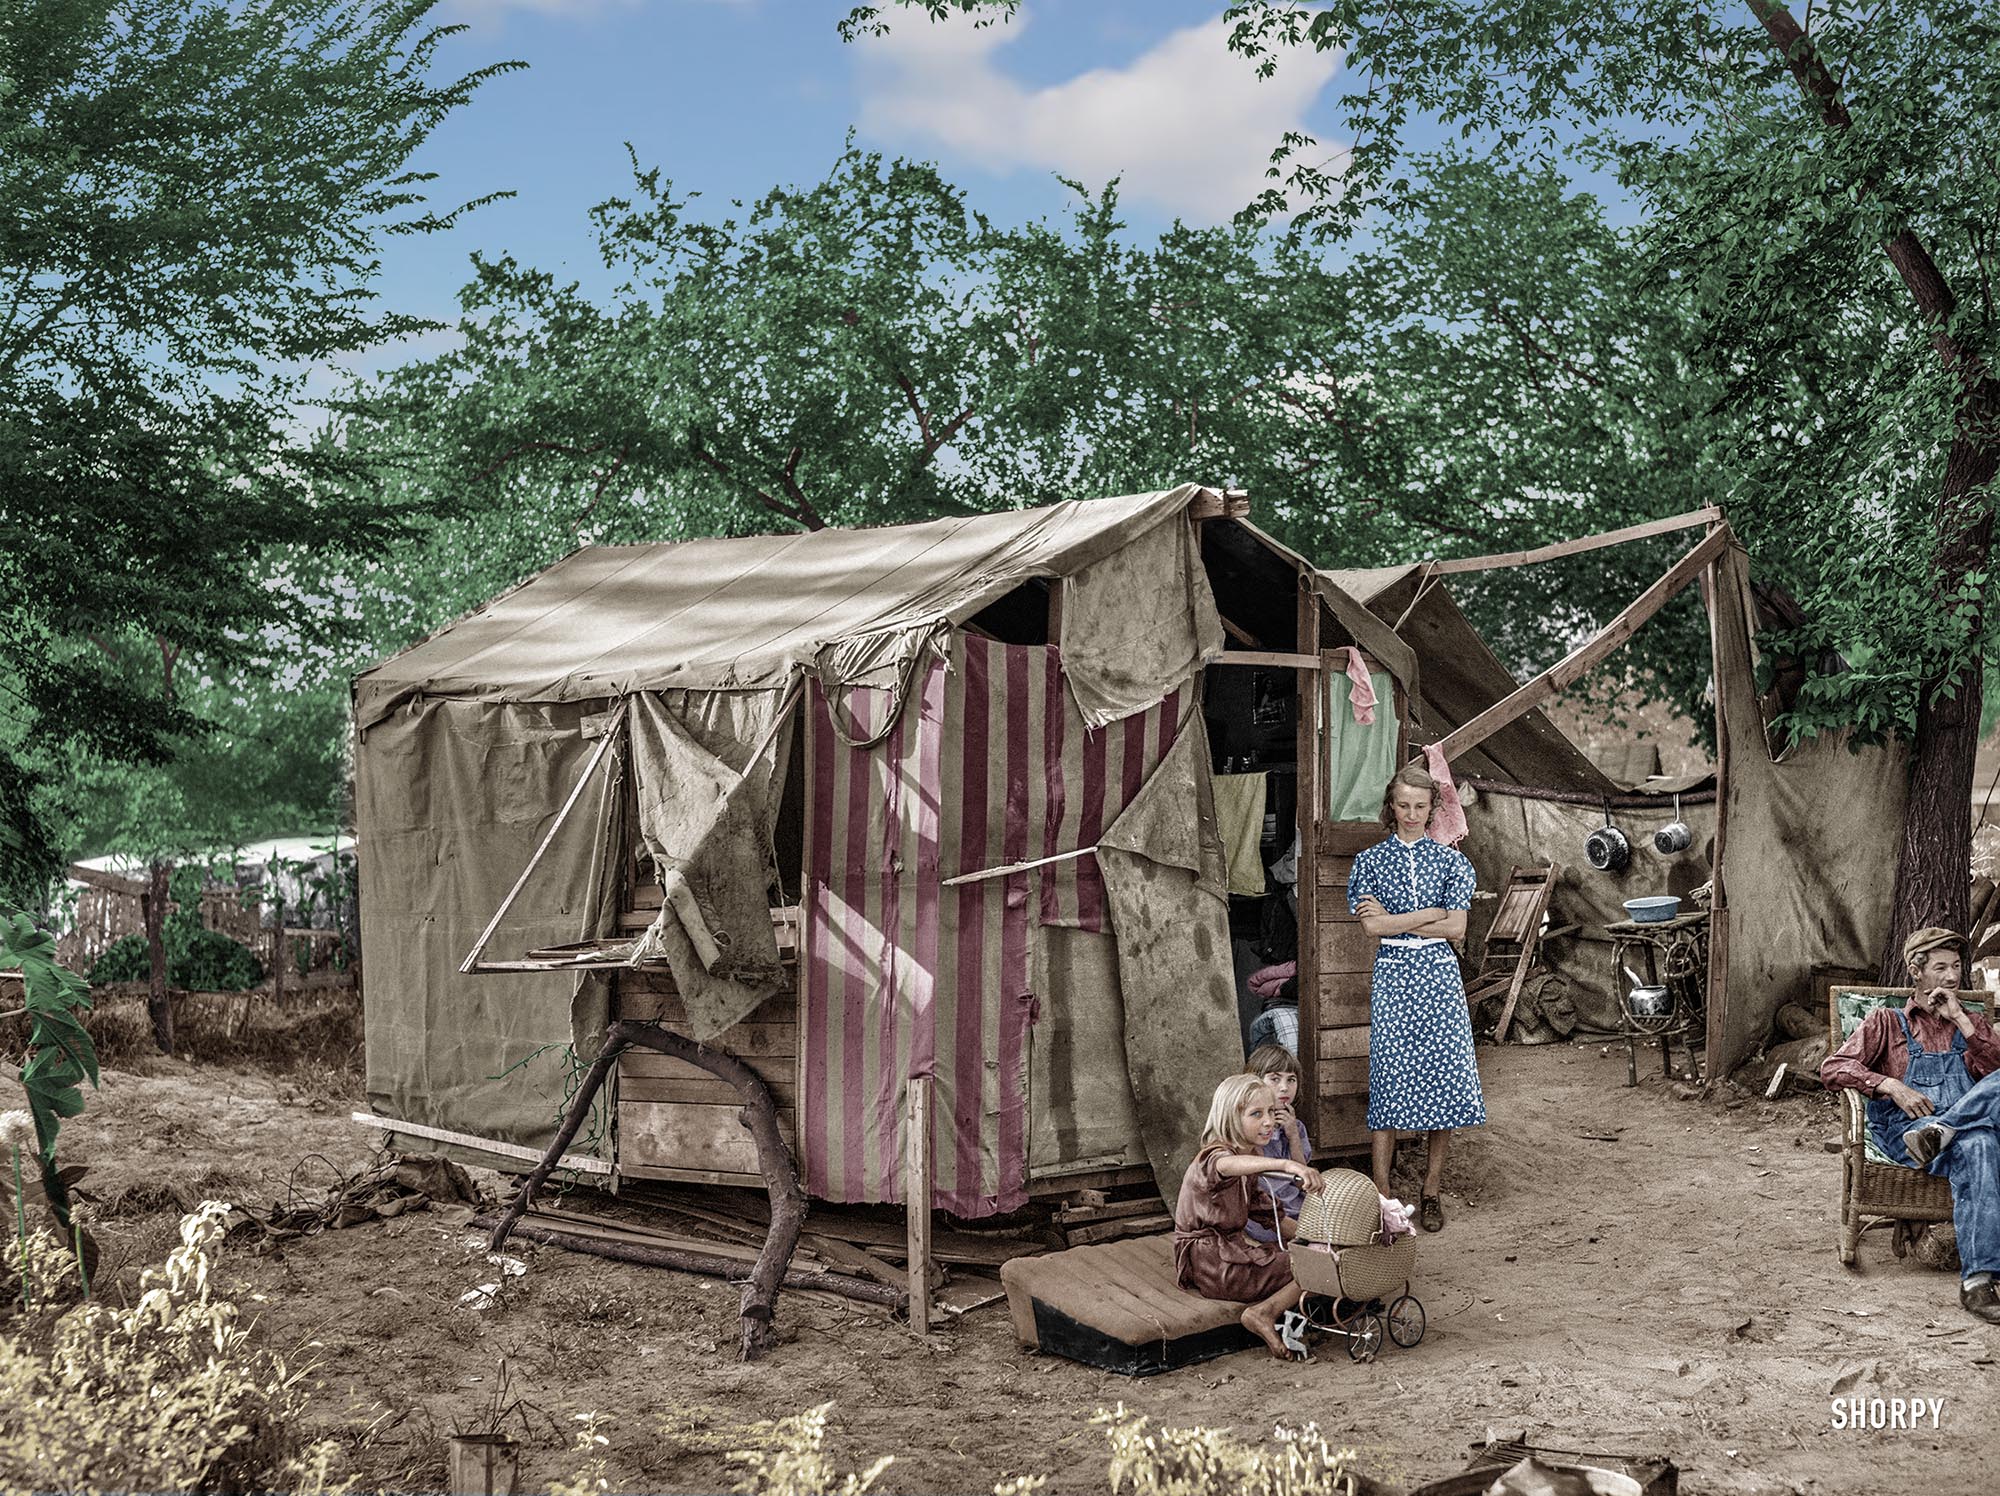 This is my version of this Shorpy Photo. I replaced the sky because it was really blown out. Photographs of The Great Depression really make me glad I live in today's America. I don't know how they ever did it.